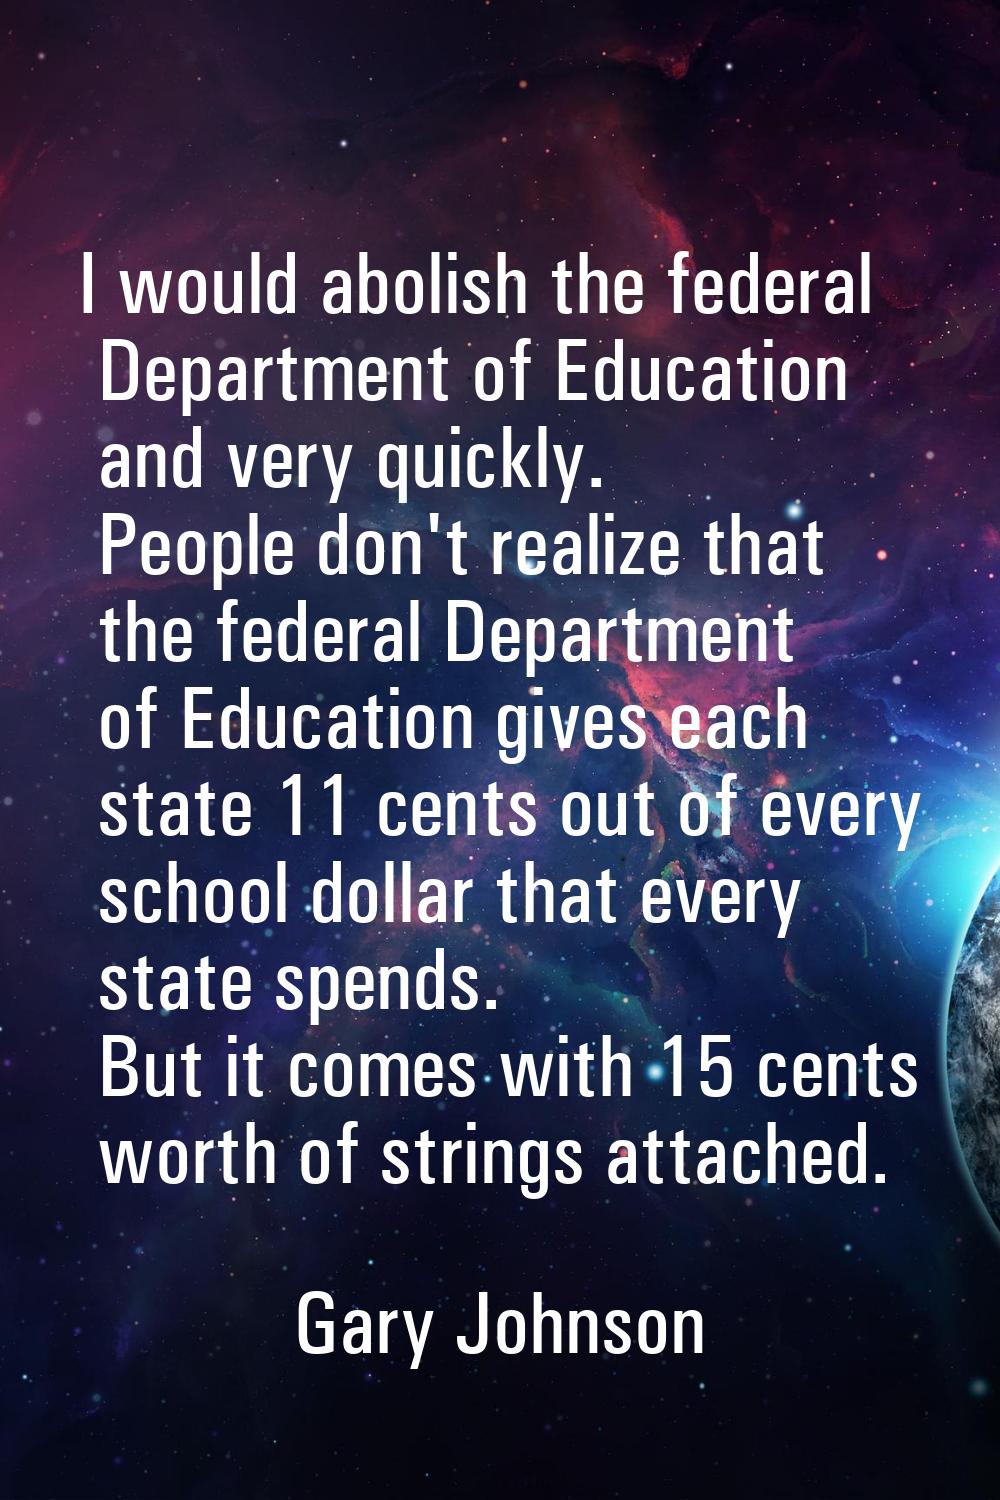 I would abolish the federal Department of Education and very quickly. People don't realize that the